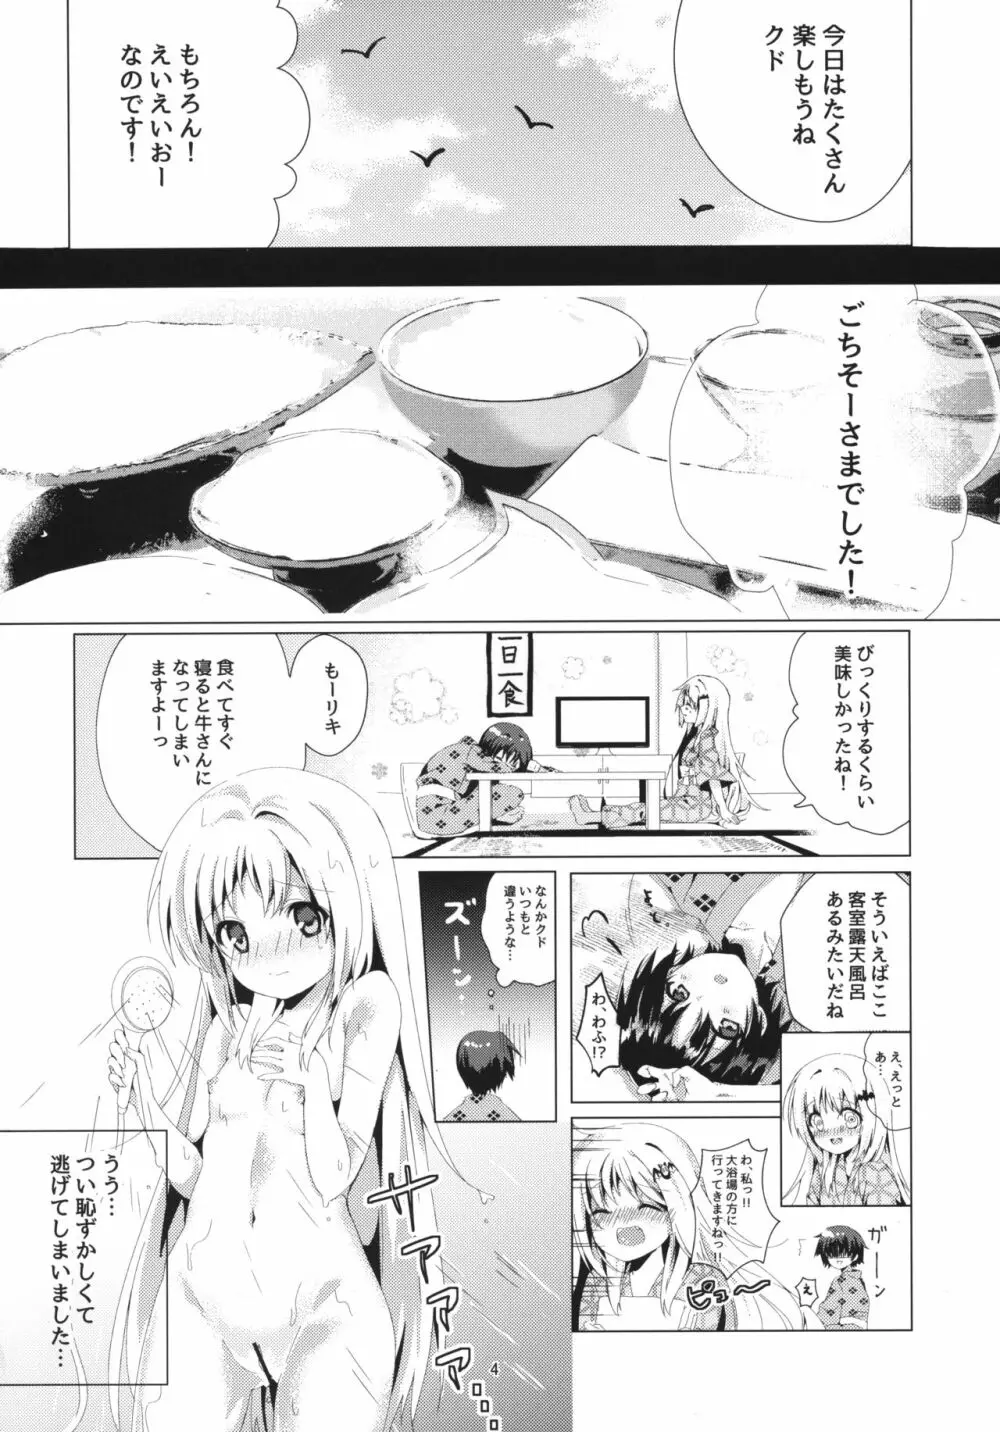 Kud After - page3